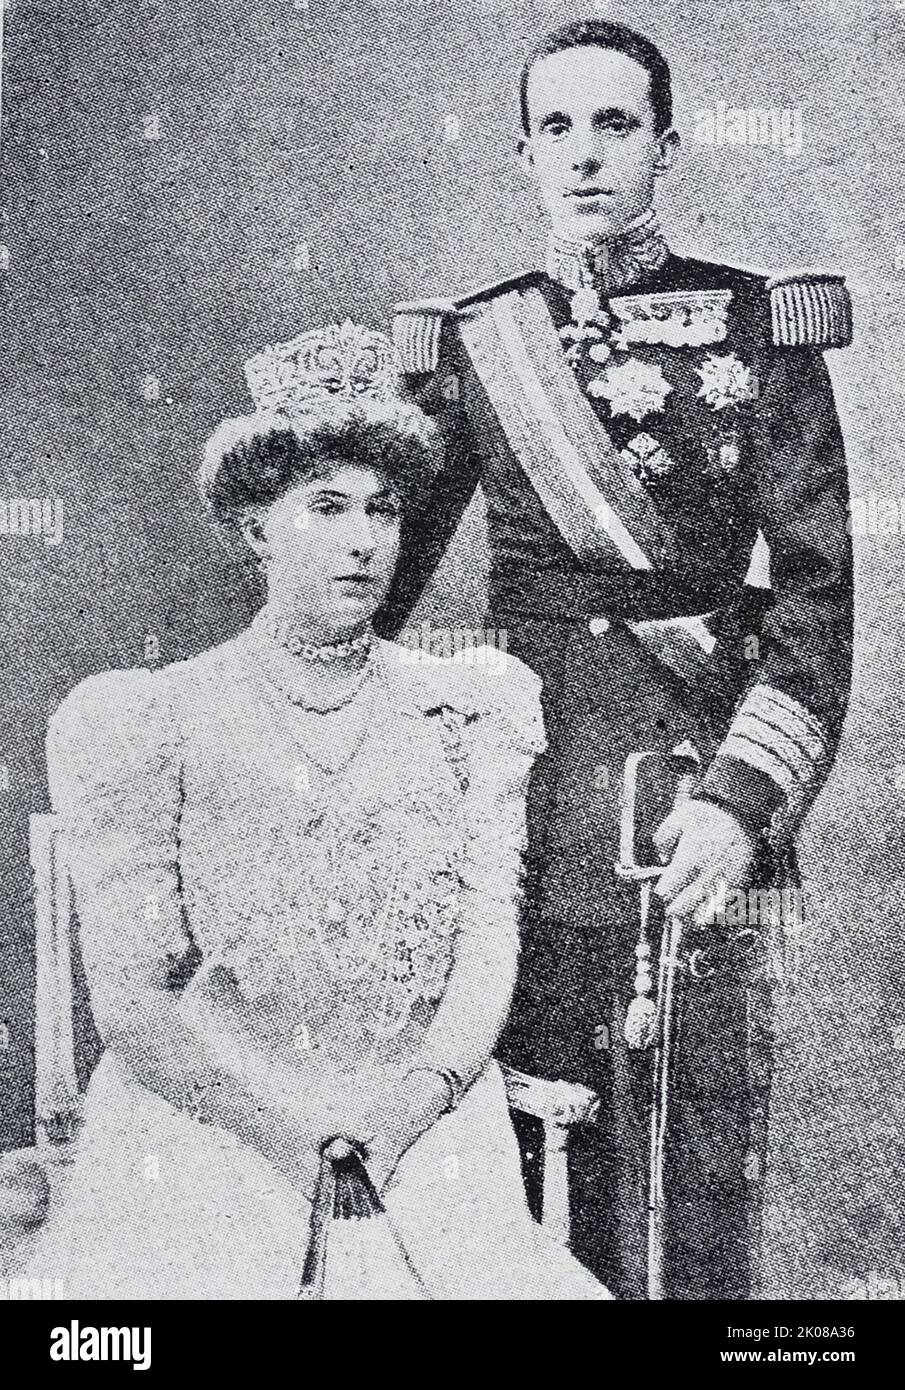 Don Alfonso XIII accompanied by Dona Victoria Eugenie Julia Ena of Battenberg. King of Spain Alfonso XIII (17 May 1886 - 28 February 1941), also known as El Africano or the African, was King of Spain from 17 May 1886 to 14 April 1931, when the Second Spanish Republic was proclaimed. Dona Victoria Eugenie Julia Ena of Battenberg (24 October 1887 - 15 April 1969) was Queen of Spain as the wife of King Alfonso XIII from their marriage on 31 May 1906 until 14 April 1931, when the Spanish Second Republic was proclaimed Stock Photo